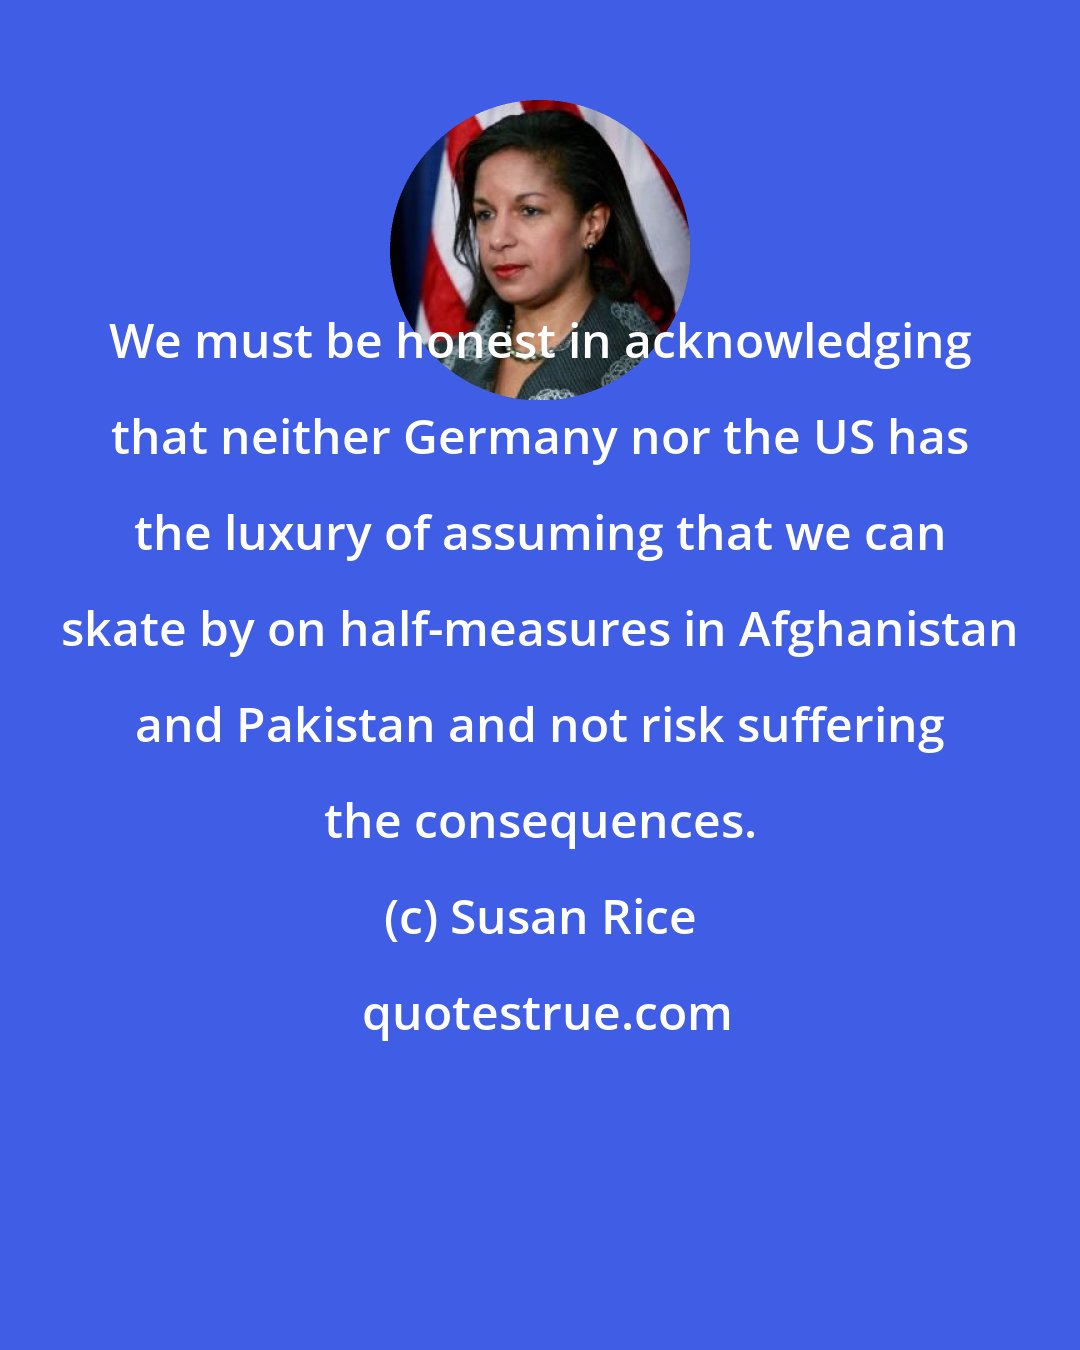 Susan Rice: We must be honest in acknowledging that neither Germany nor the US has the luxury of assuming that we can skate by on half-measures in Afghanistan and Pakistan and not risk suffering the consequences.